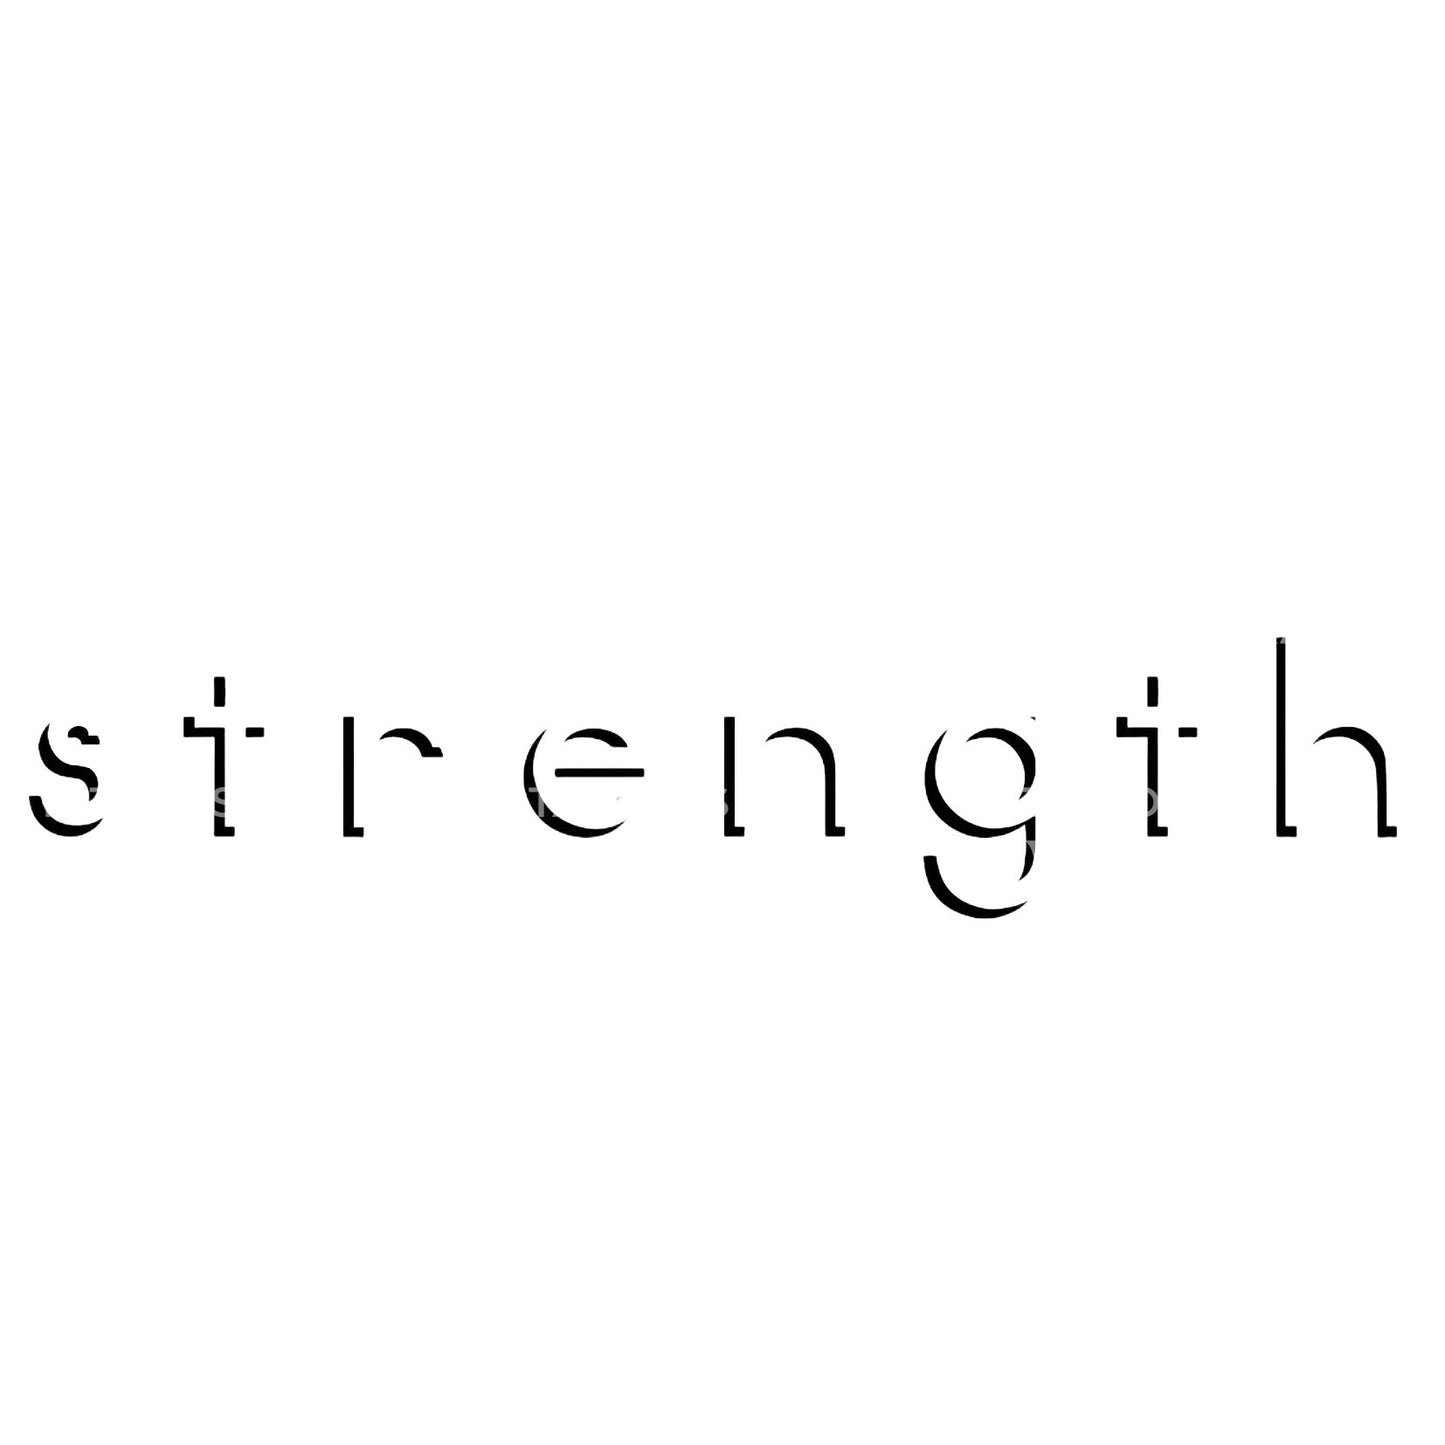 Strength Inverted Lettering Tattoo Design